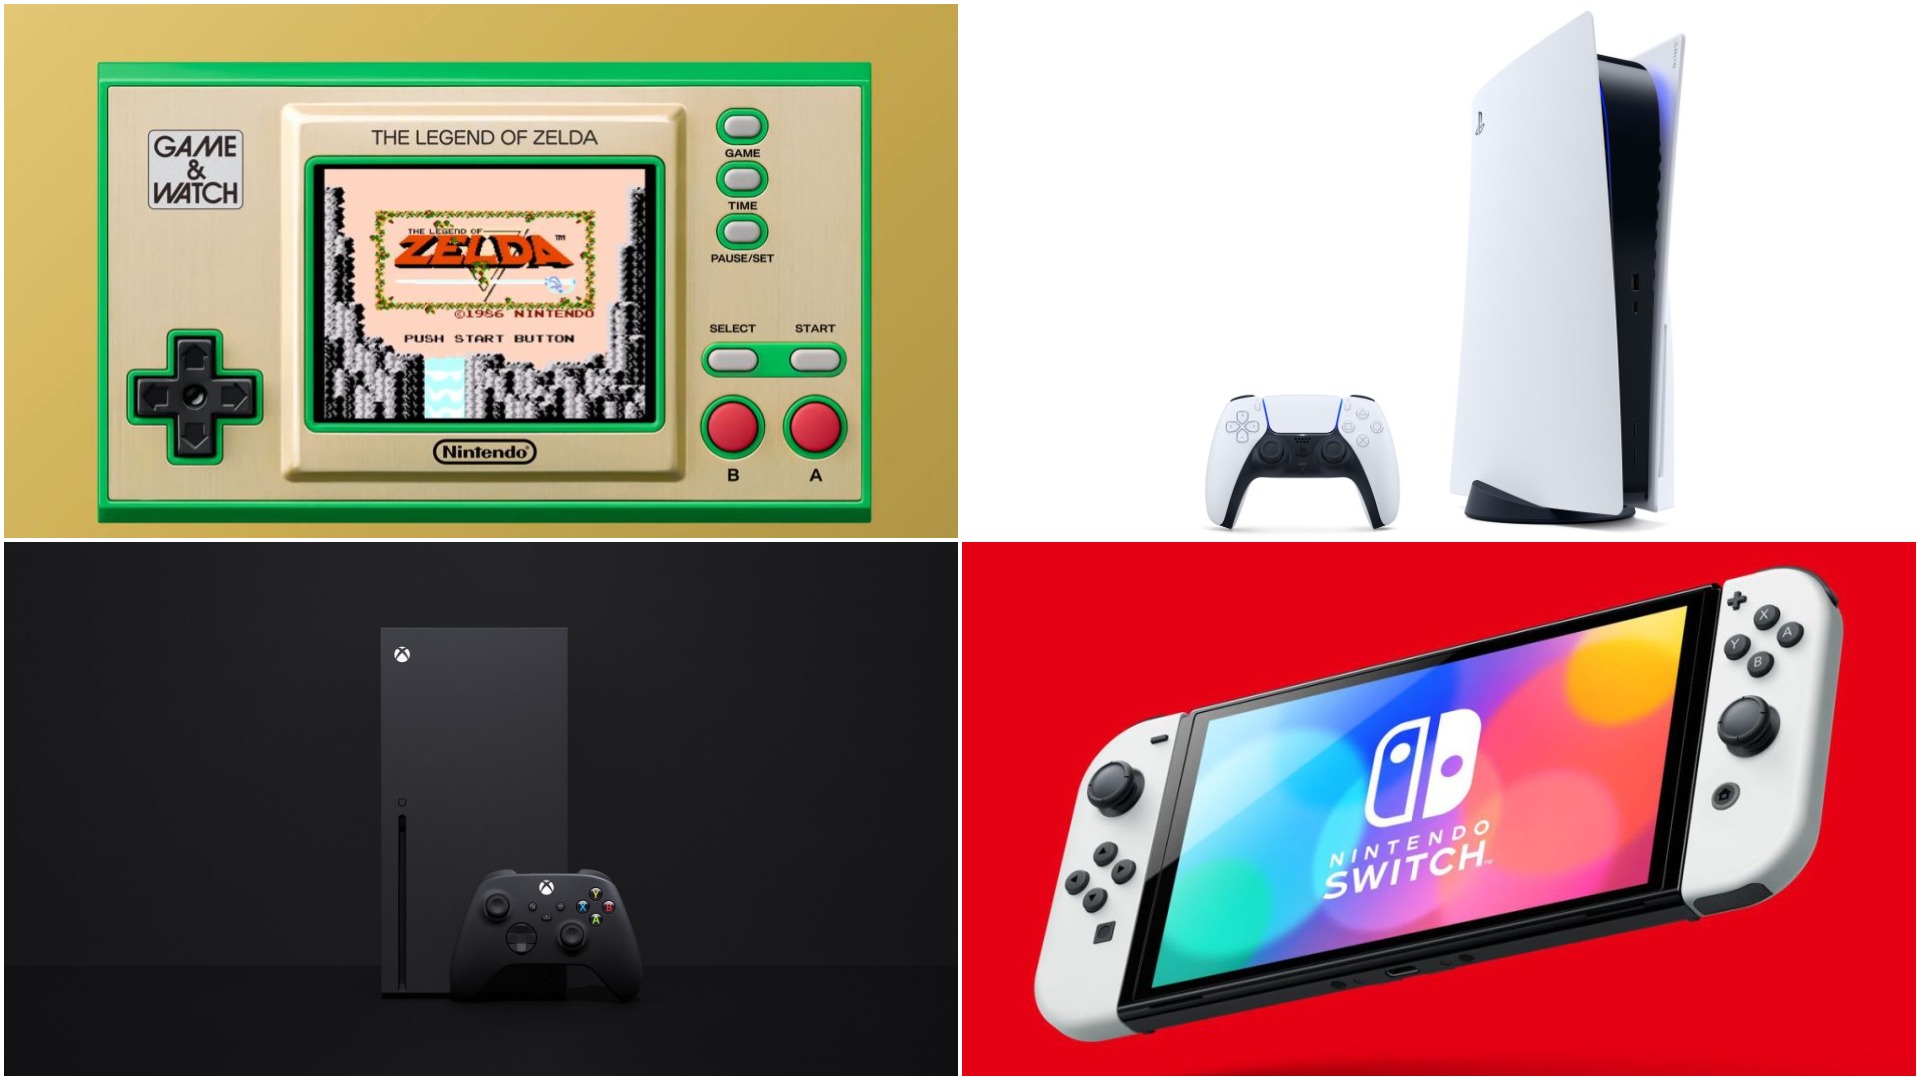 Best Video Game Deals and Gifts 2021: PS5, Xbox, Nintendo Switch, and More